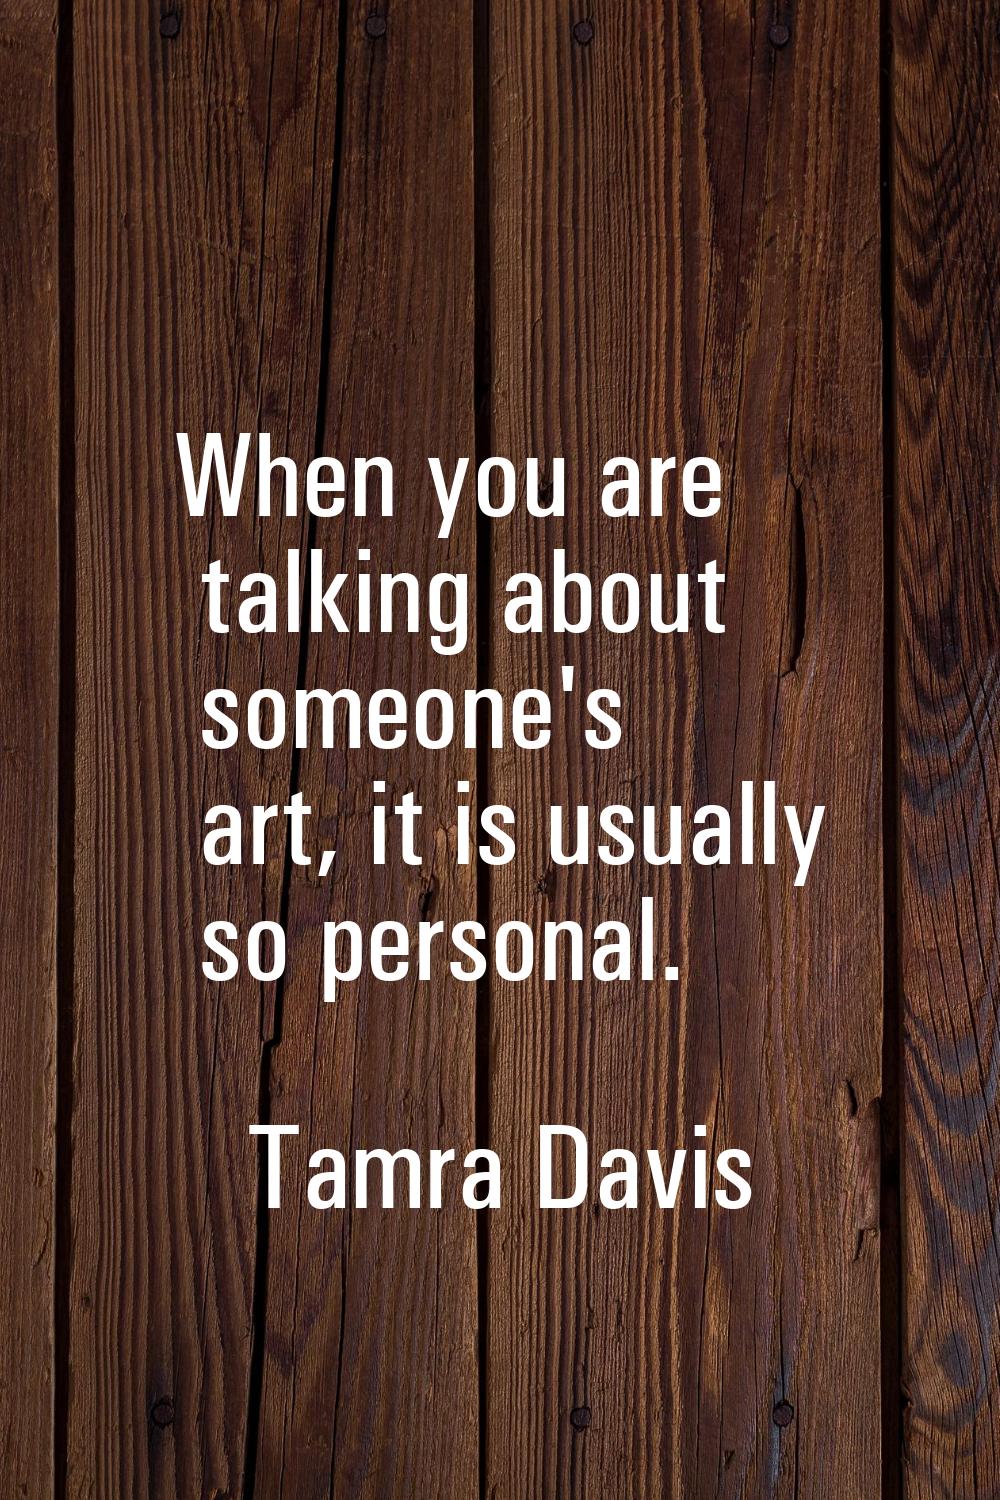 When you are talking about someone's art, it is usually so personal.